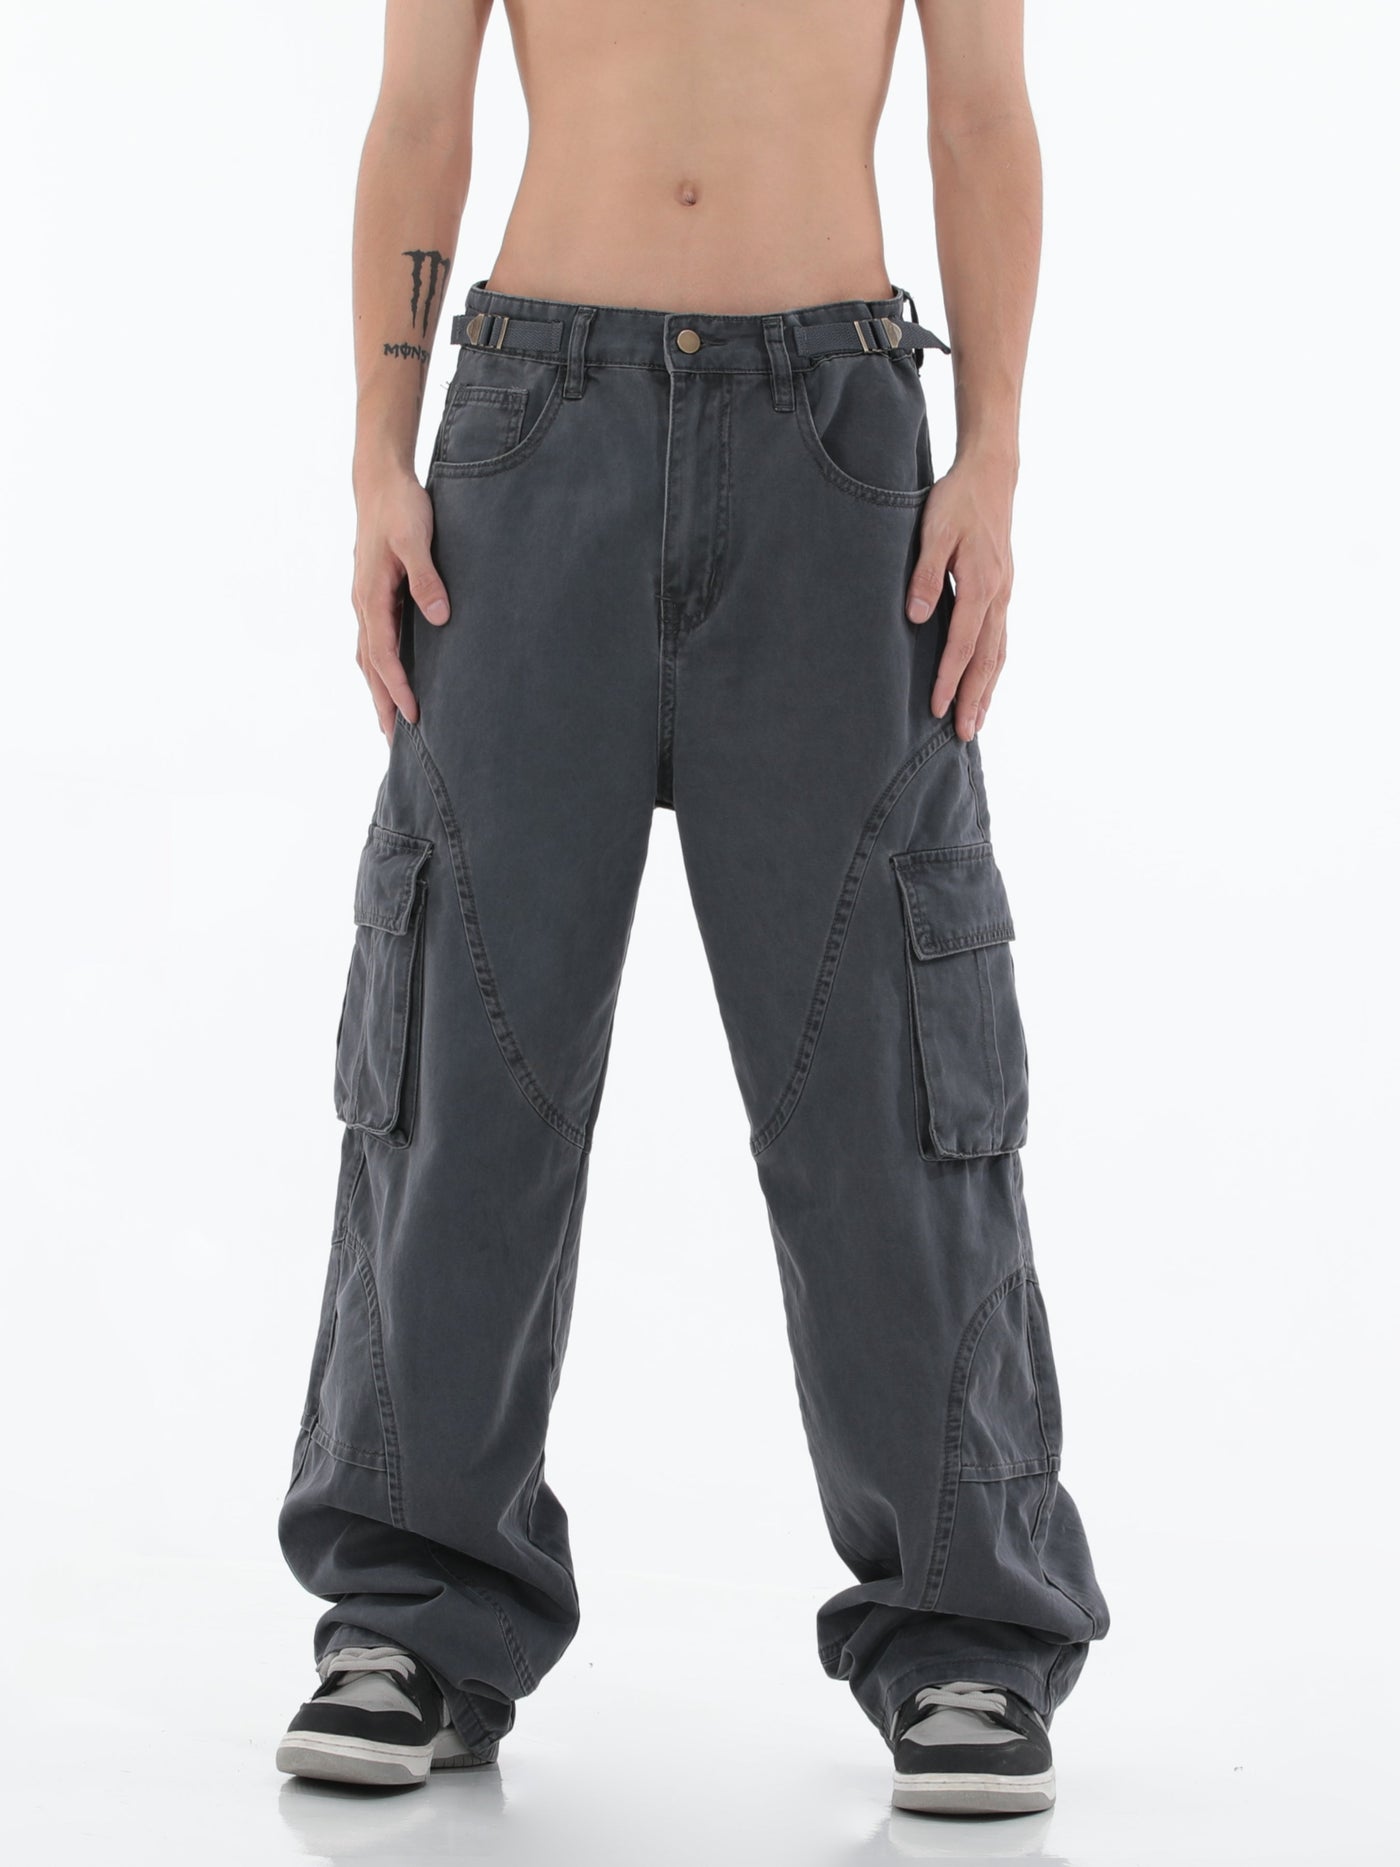 MEBXX Washed Straight Loose Cargo Pants Korean Street Fashion Pants By Made Extreme Shop Online at OH Vault